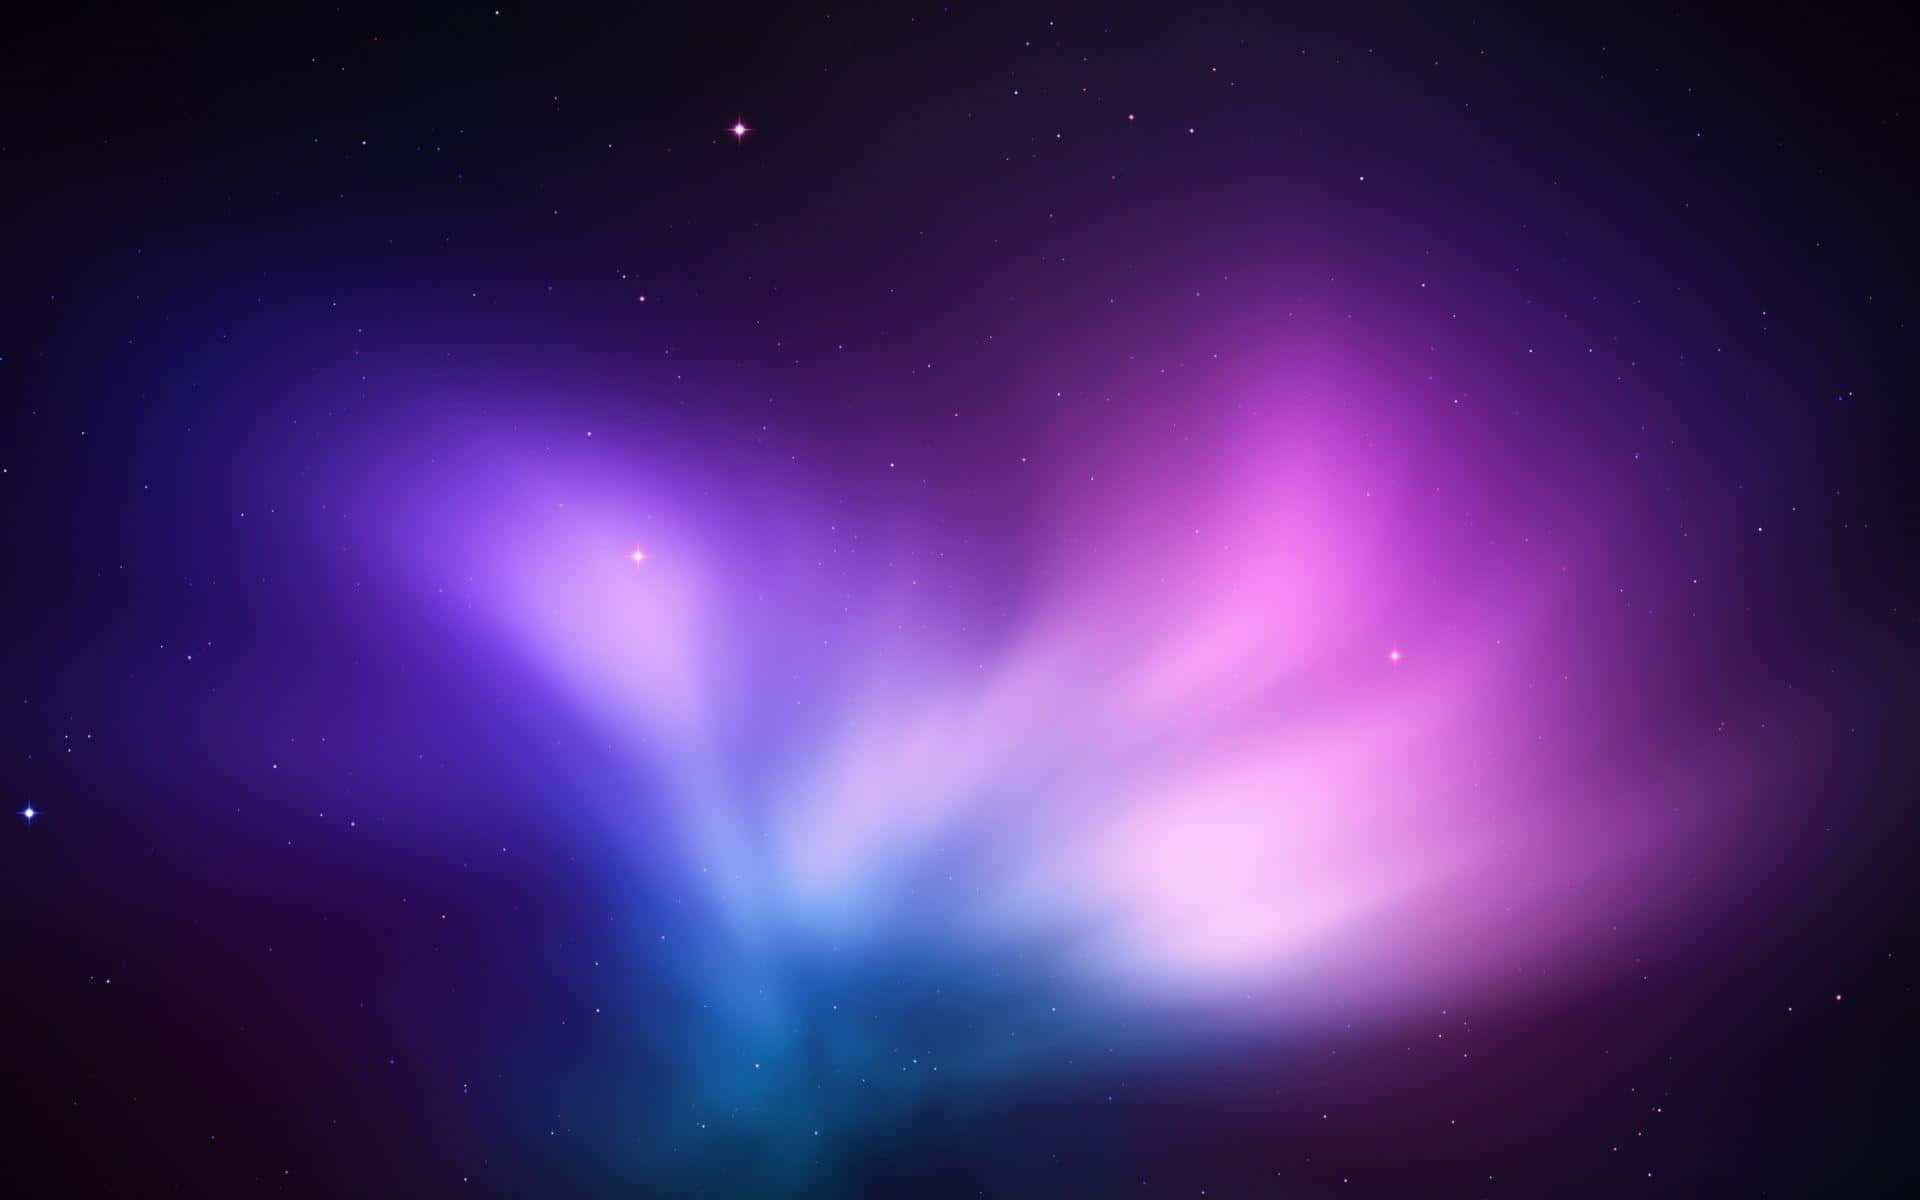 Explore an eerie and mysterious Purple Space